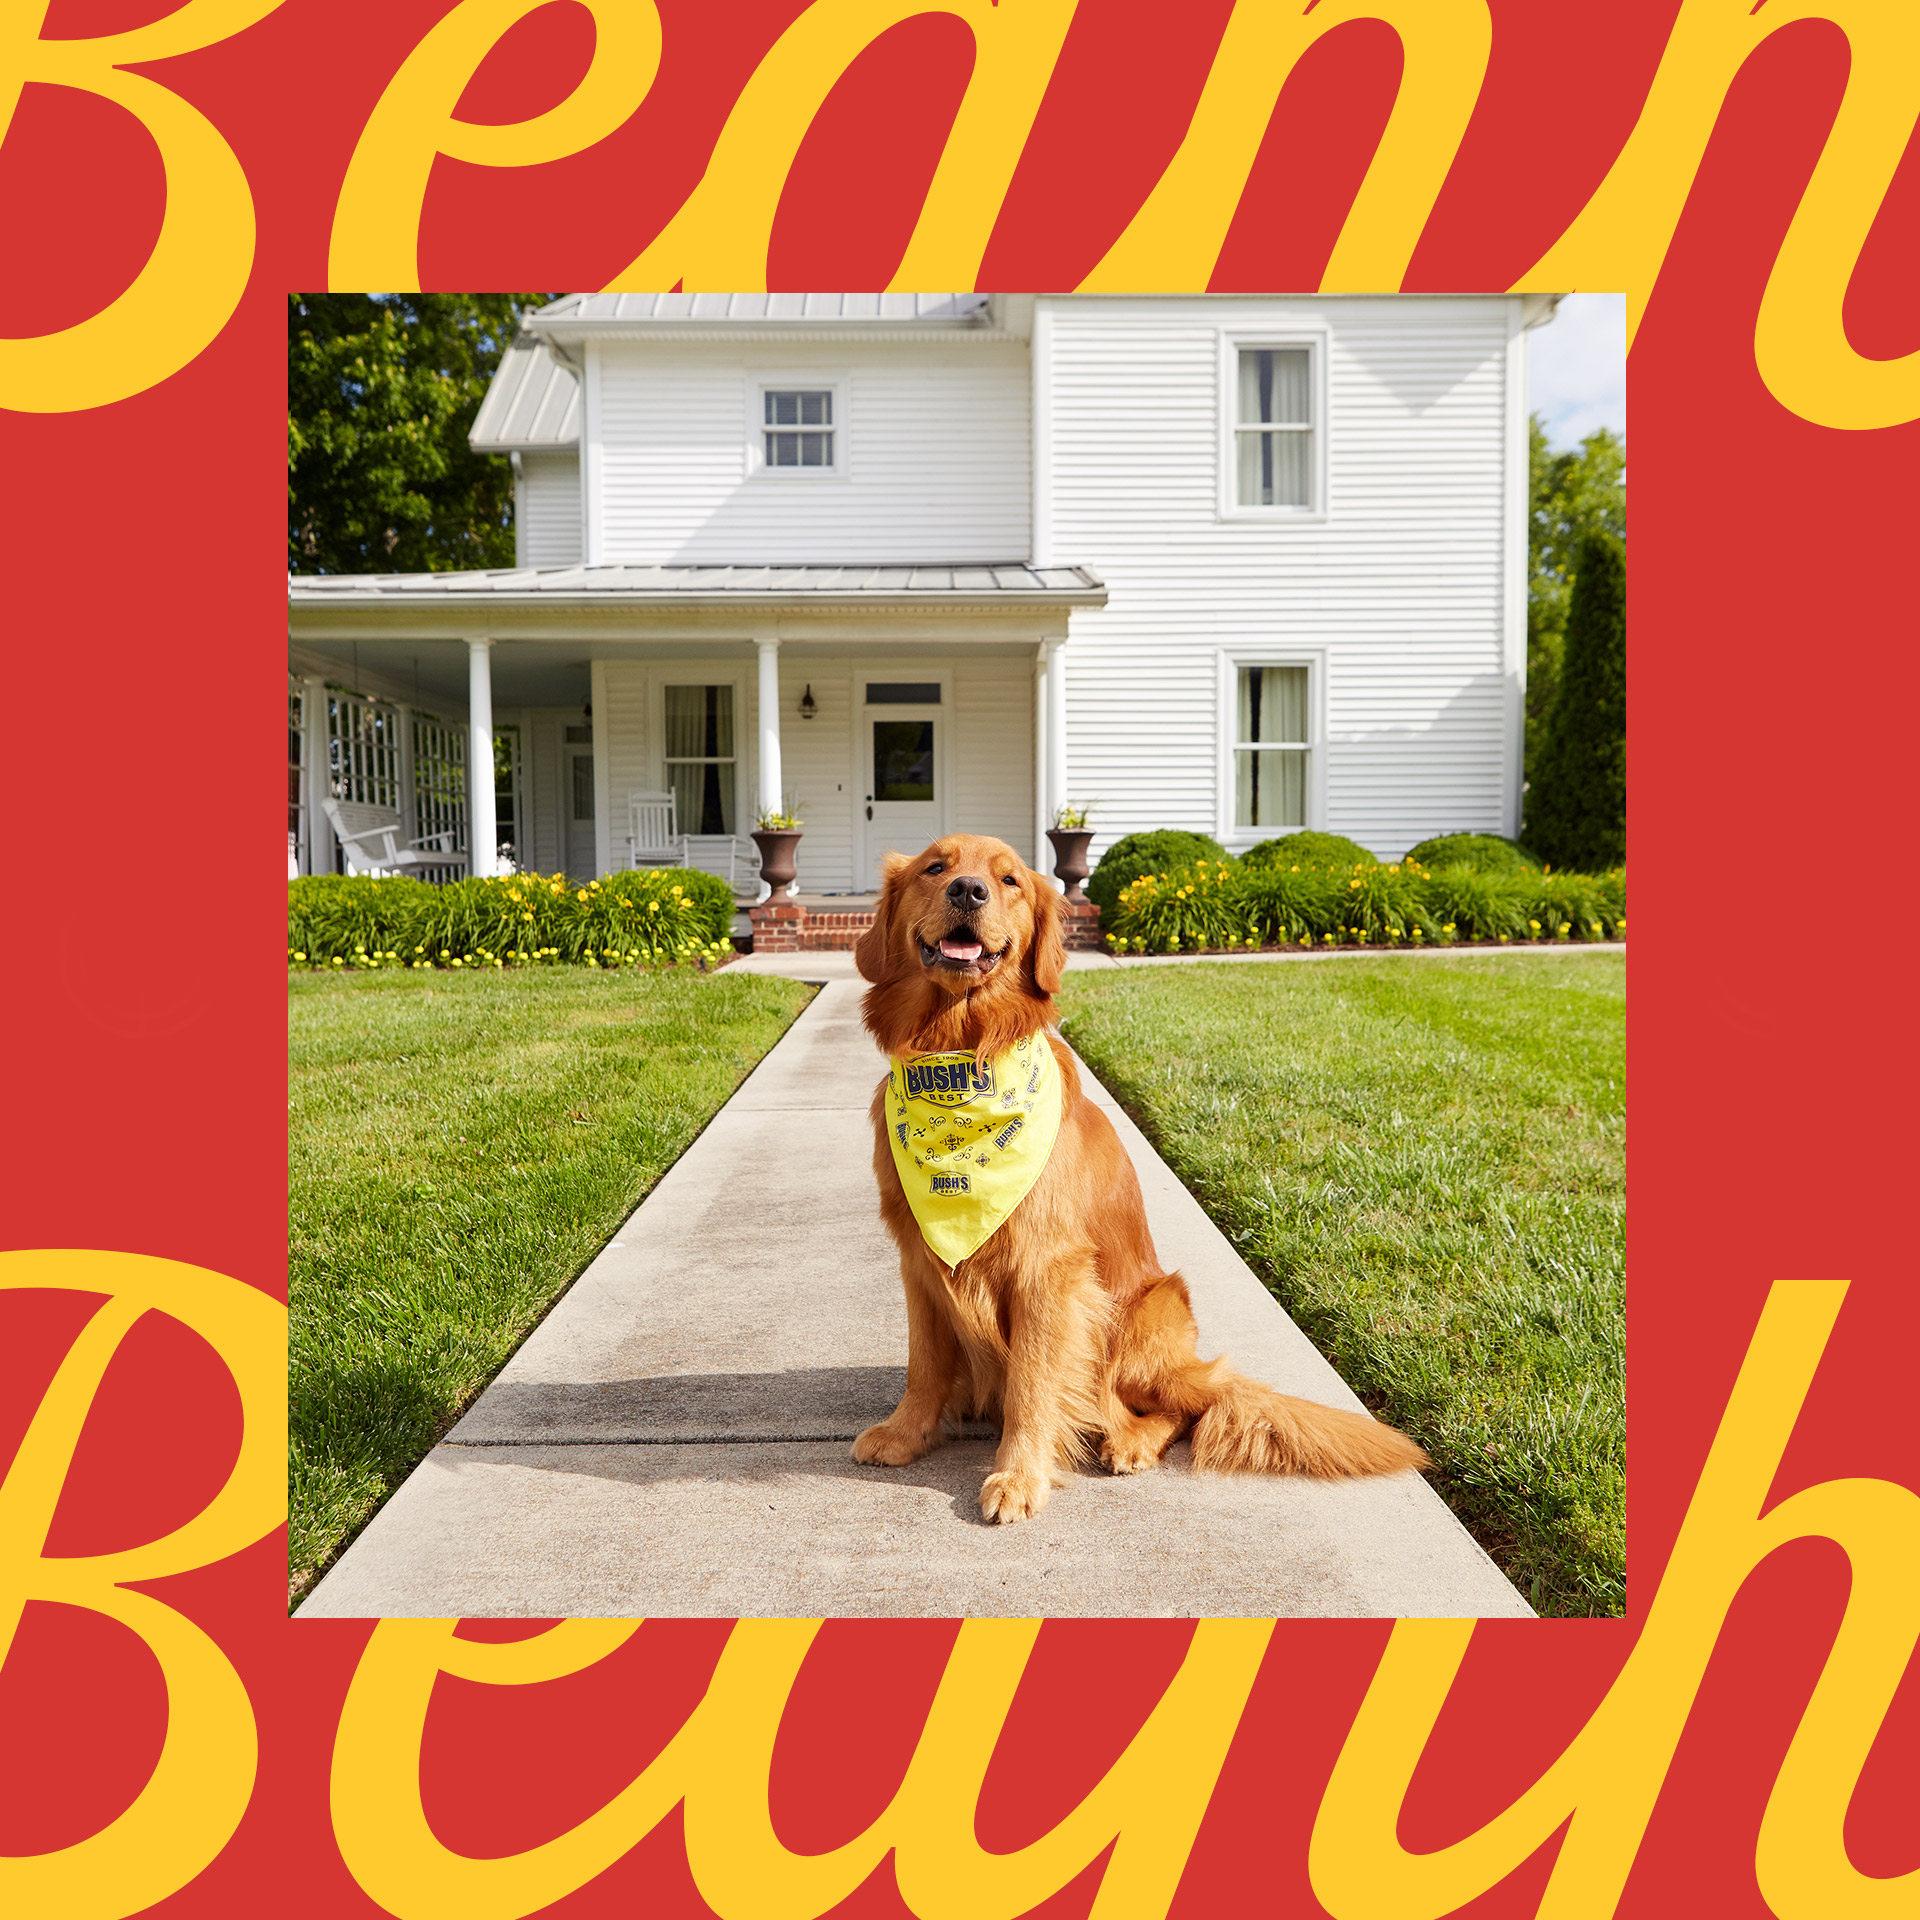 Bush’s Beans mascot dog Duke standing in front of a white house with front porch wearing yellow bandana